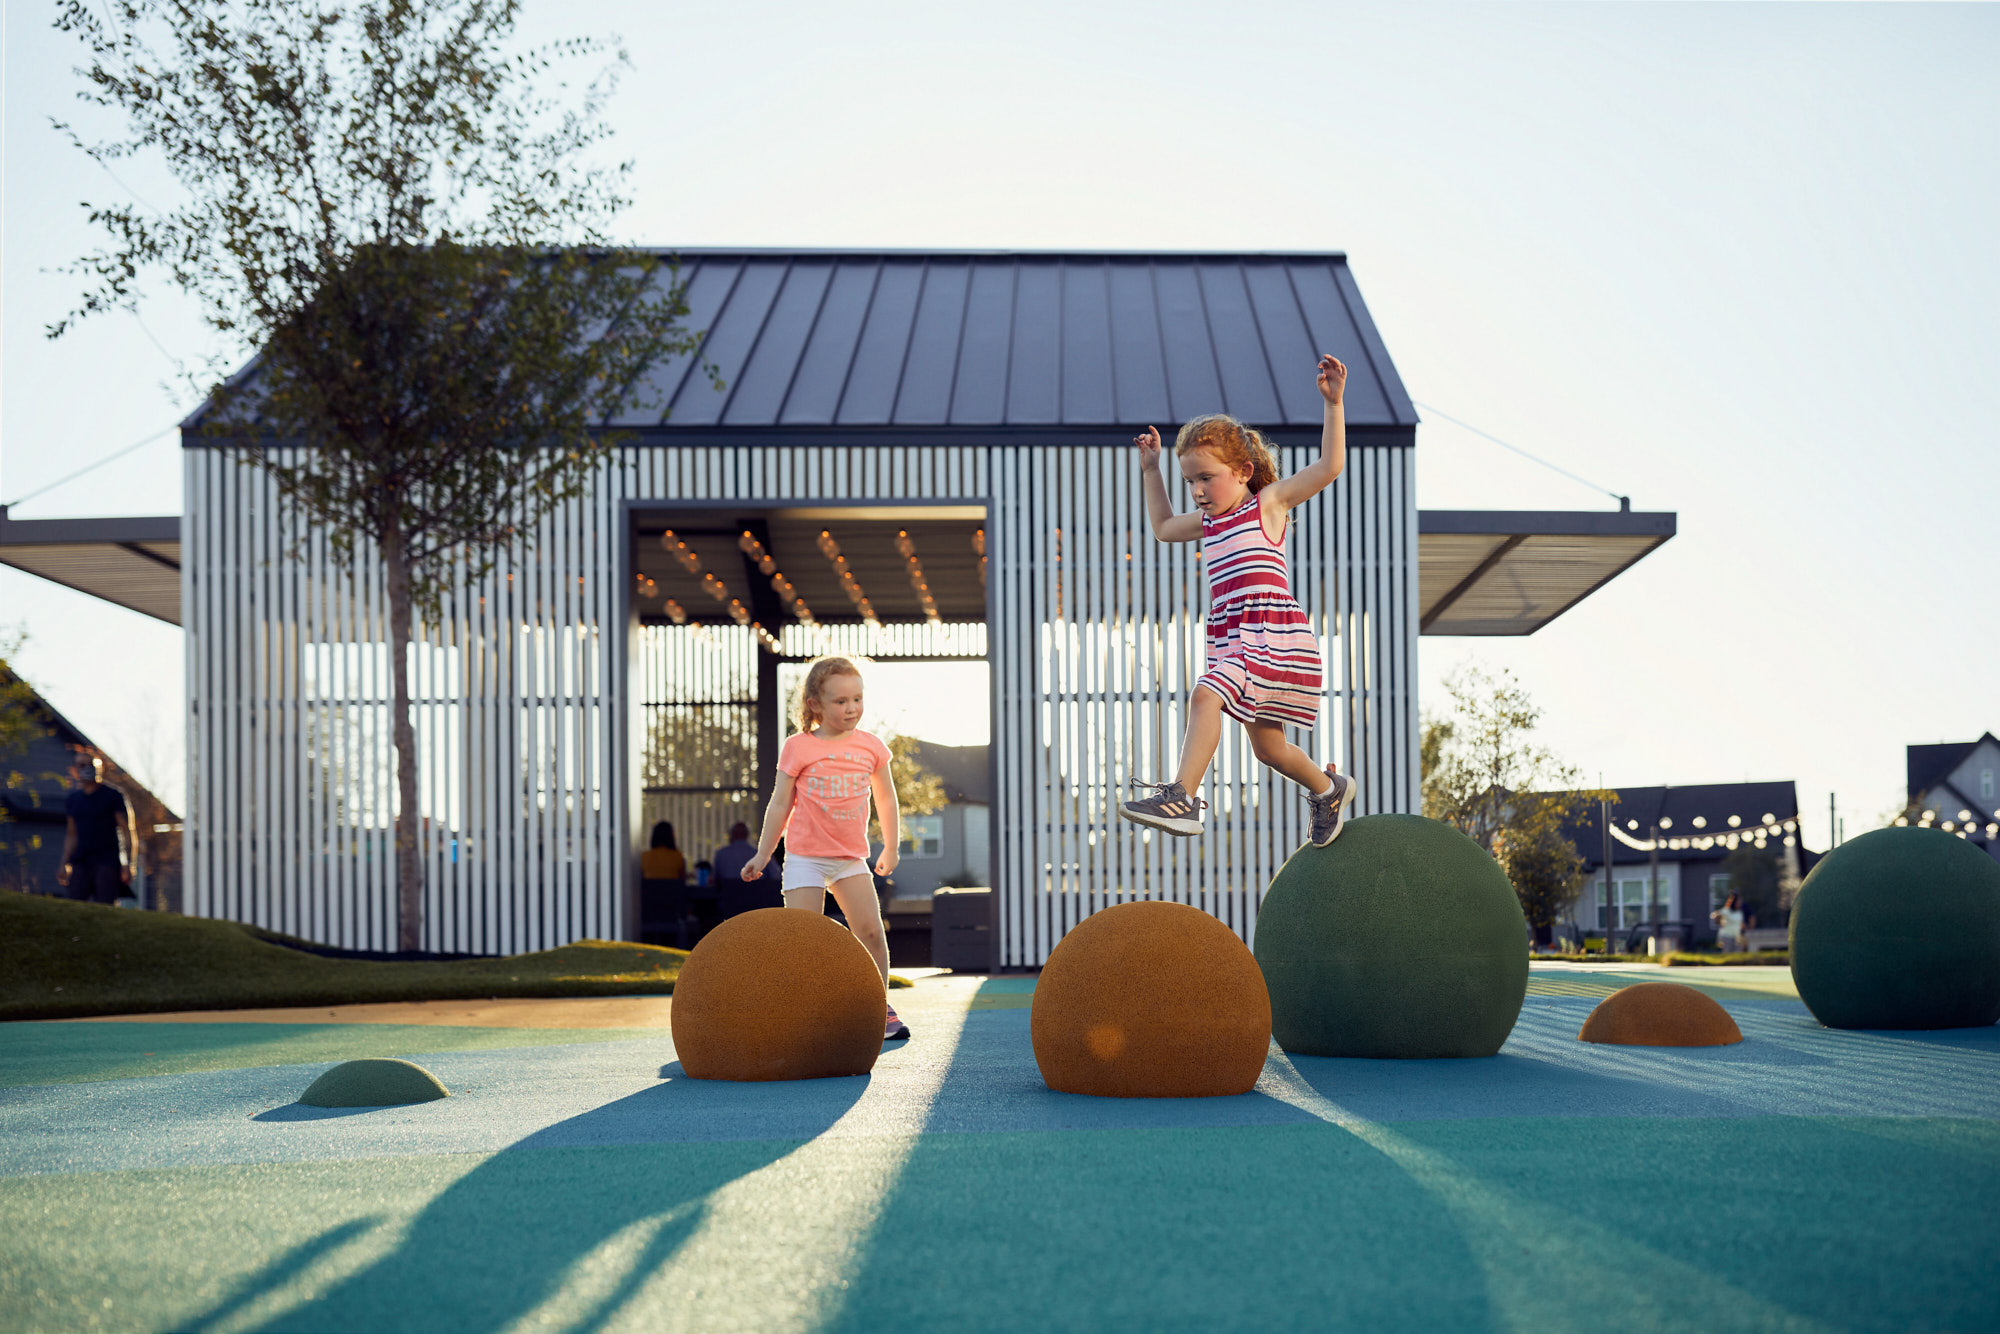 Young Girls at Playground | Lifestyle Photography